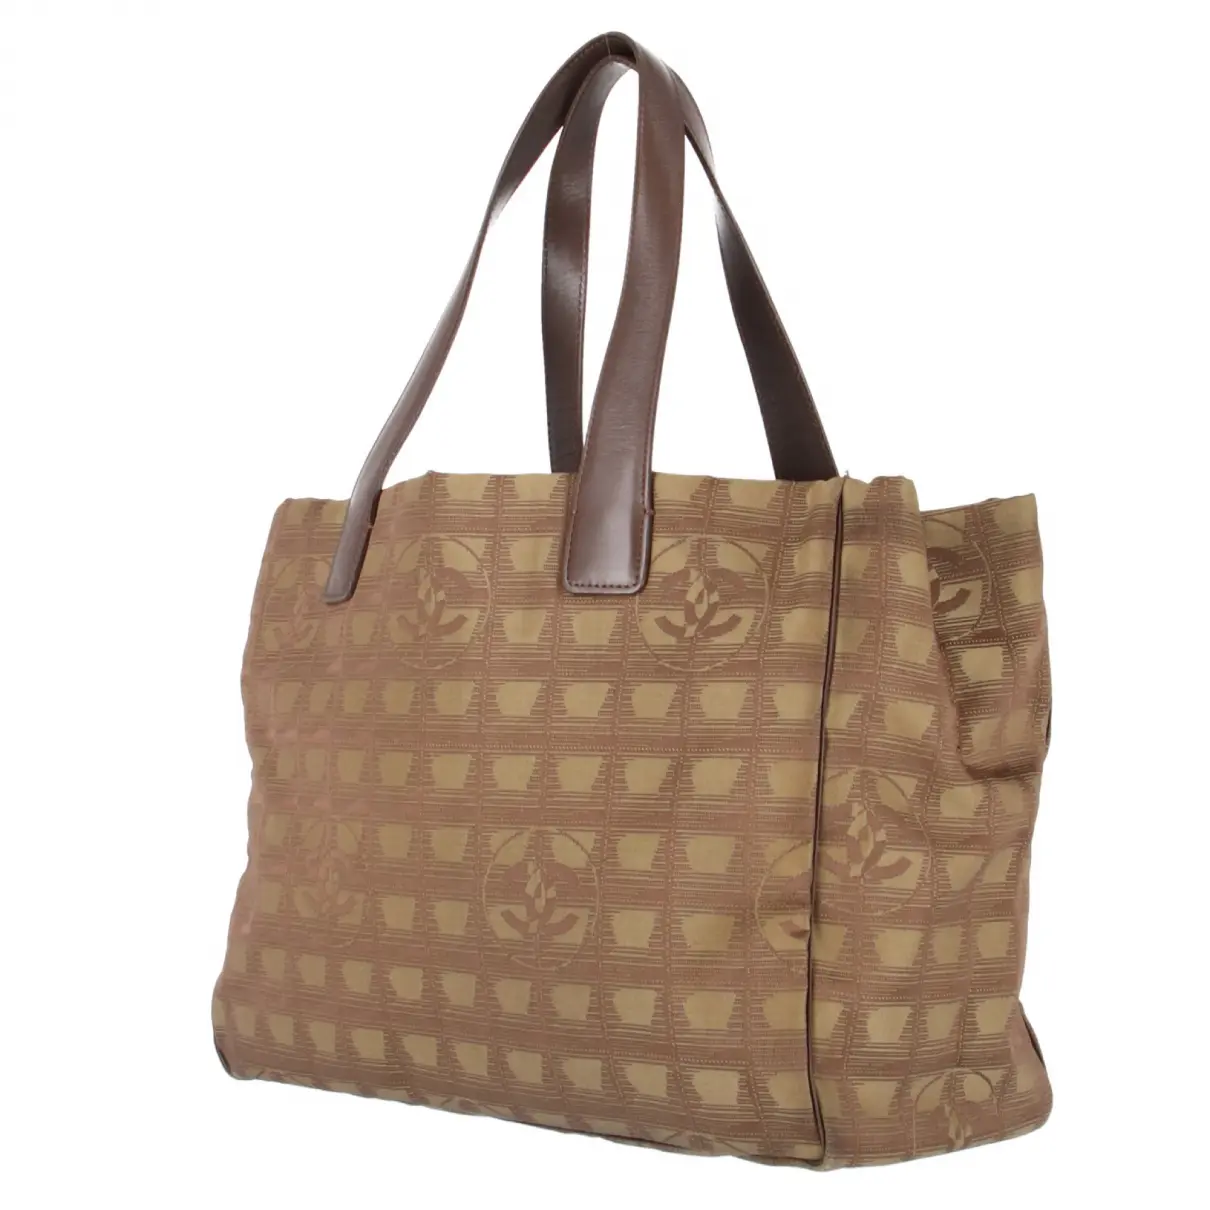 Buy Chanel Cloth tote online